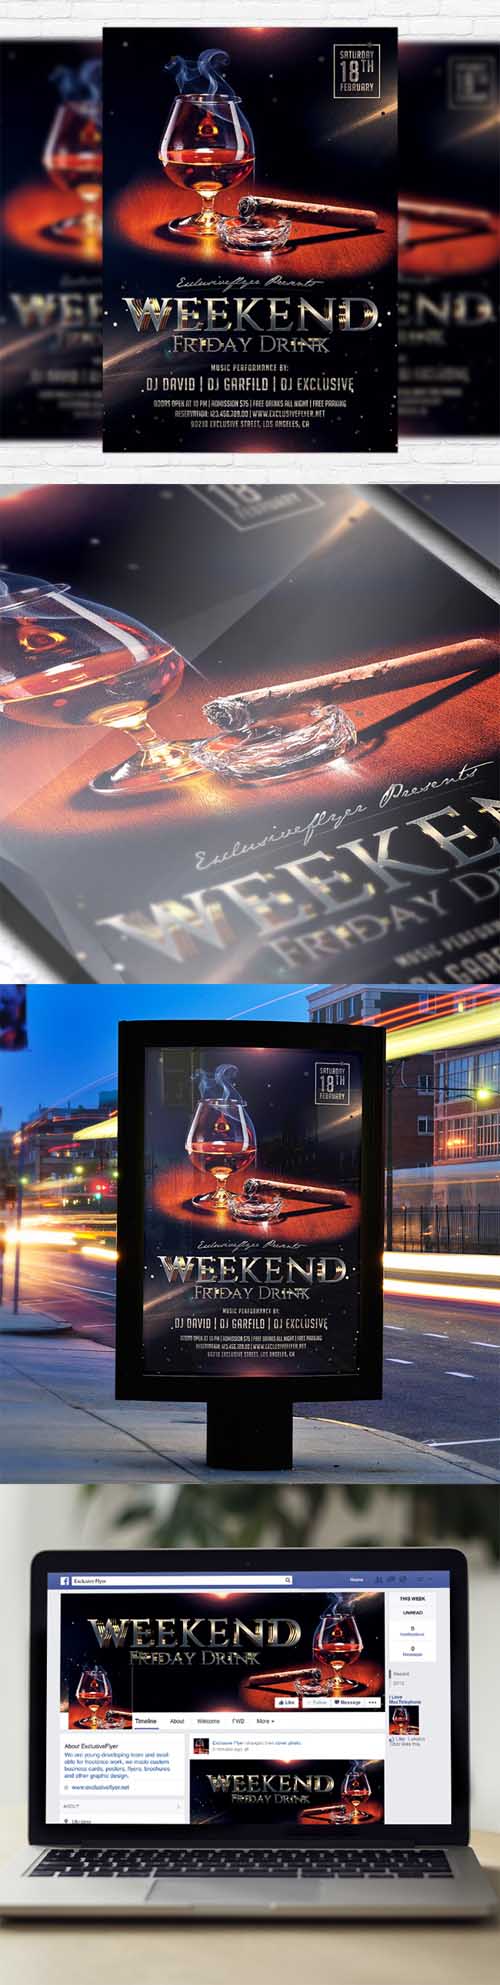 Flyer Template - Weekend Friday Drink + Facebook Cover 8